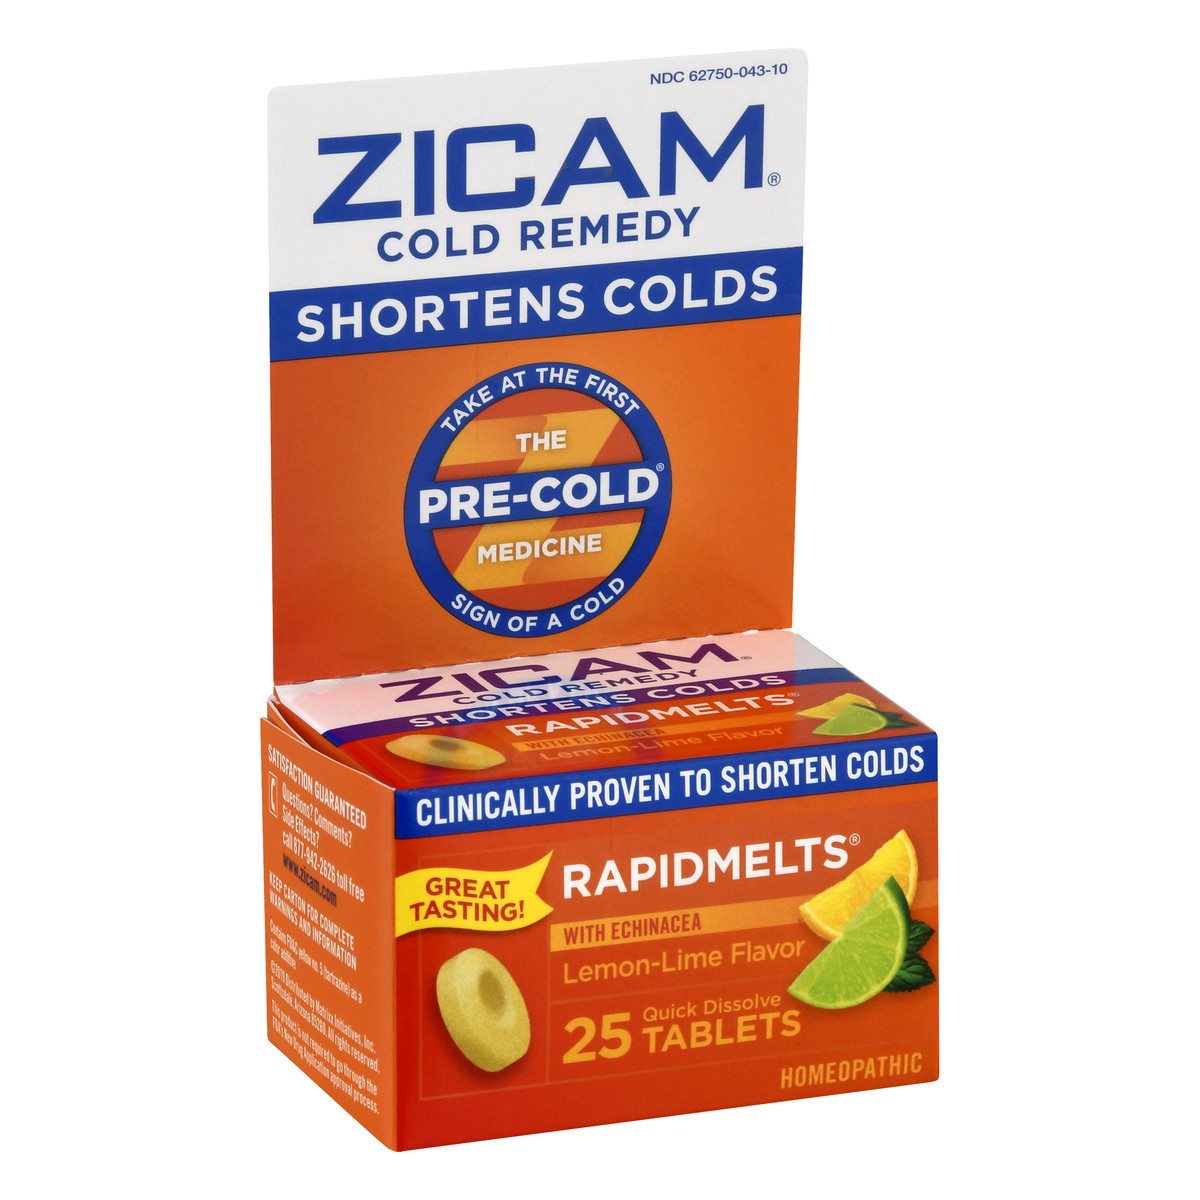 slide 4 of 9, Zicam Cold Remedy Zinc Rapidmelts, Lemon Lime Flavor, with Echinacea, Homeopathic, Cold Shortening Medicine, Shortens Cold Duration, Sugar-Free, Dye-Free, 18 Count, 25 ct